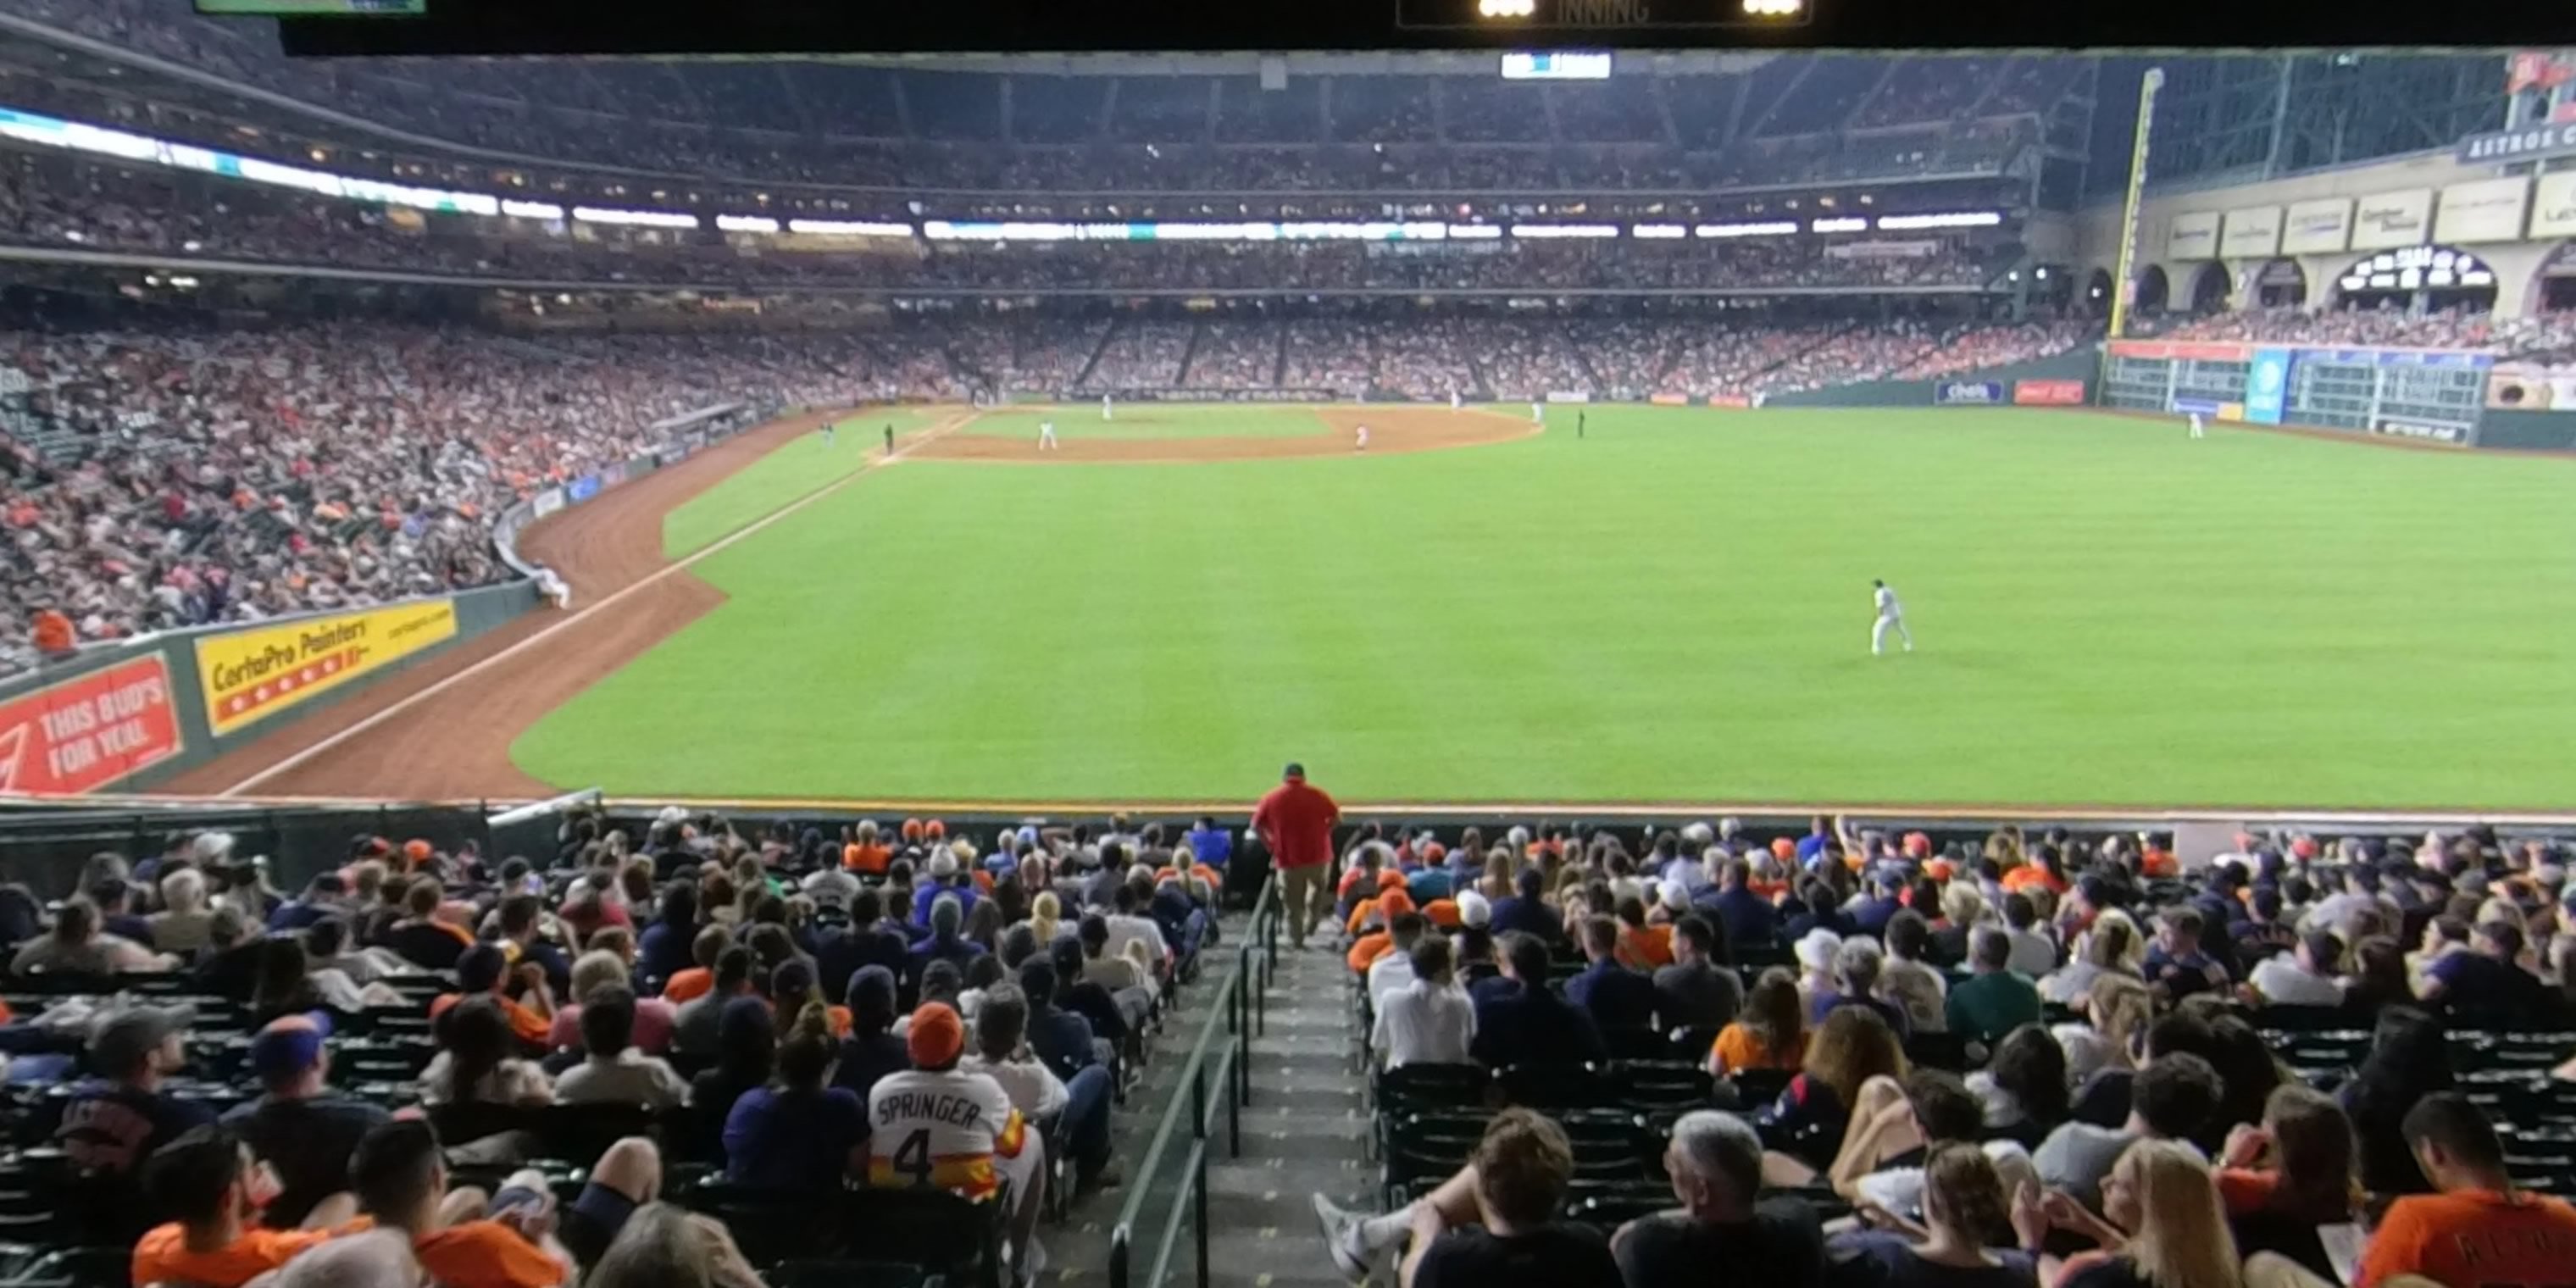 section 152 panoramic seat view  for baseball - minute maid park